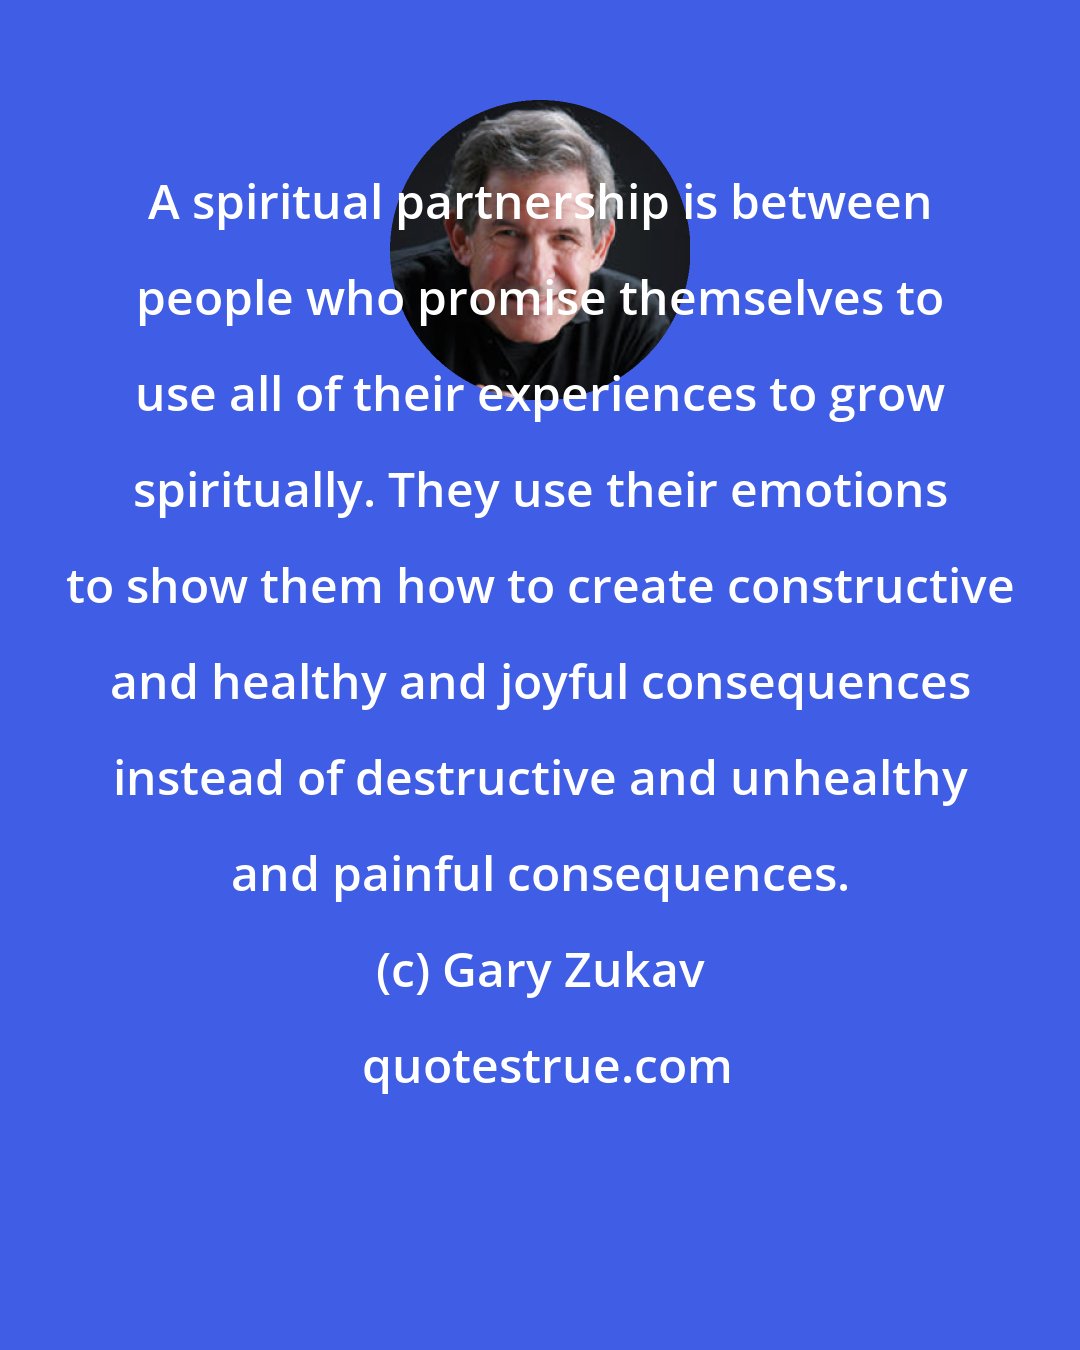 Gary Zukav: A spiritual partnership is between people who promise themselves to use all of their experiences to grow spiritually. They use their emotions to show them how to create constructive and healthy and joyful consequences instead of destructive and unhealthy and painful consequences.